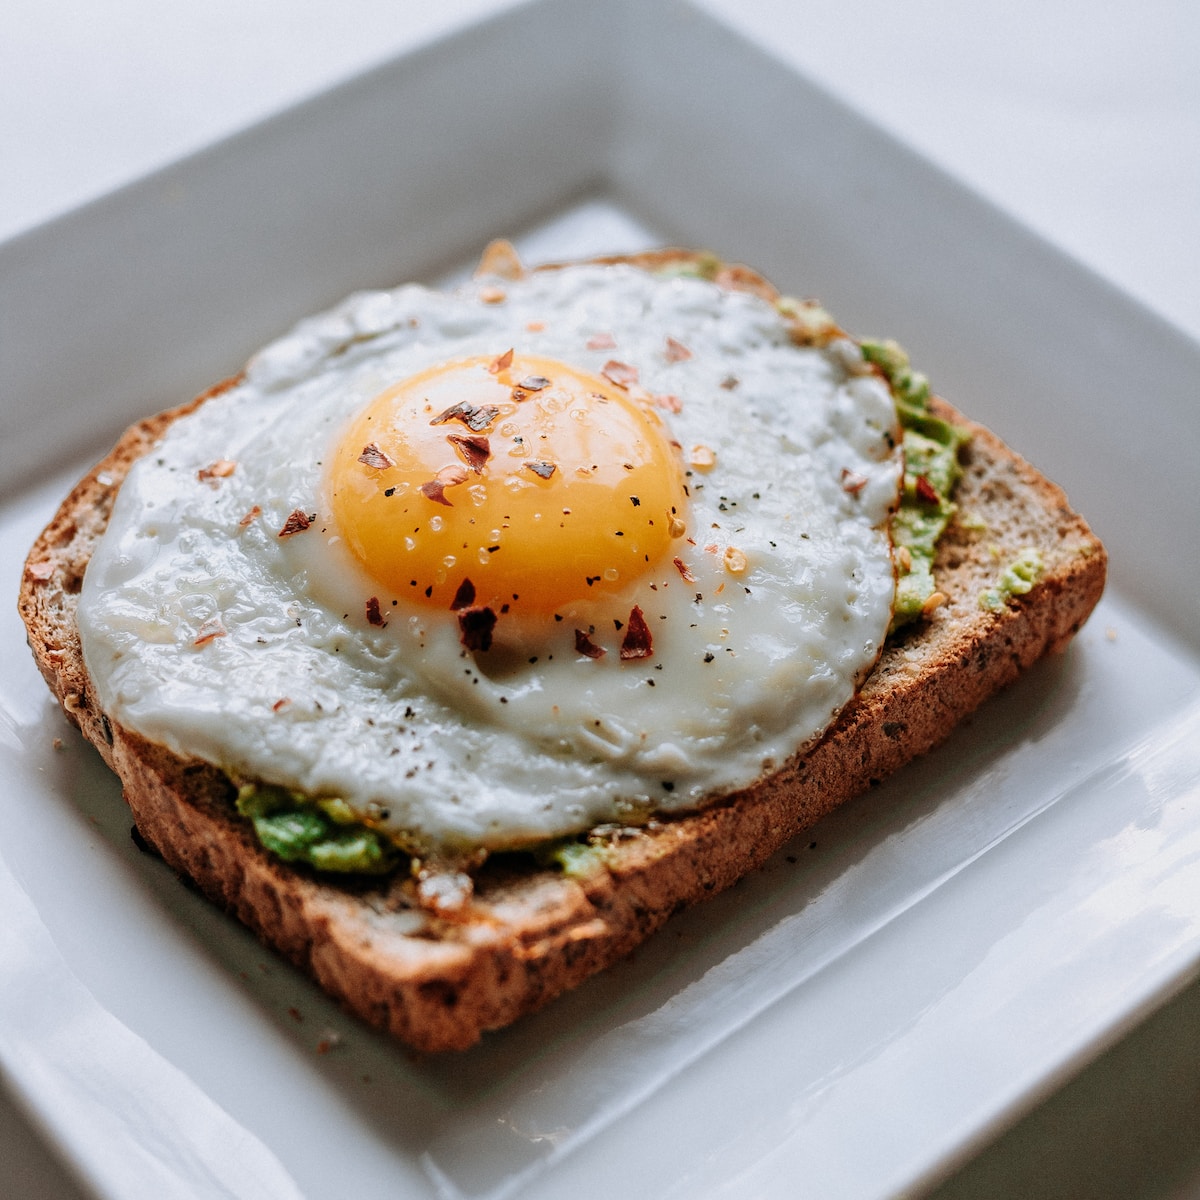 hangover bread with sunny side-up egg served on white ceramic plate